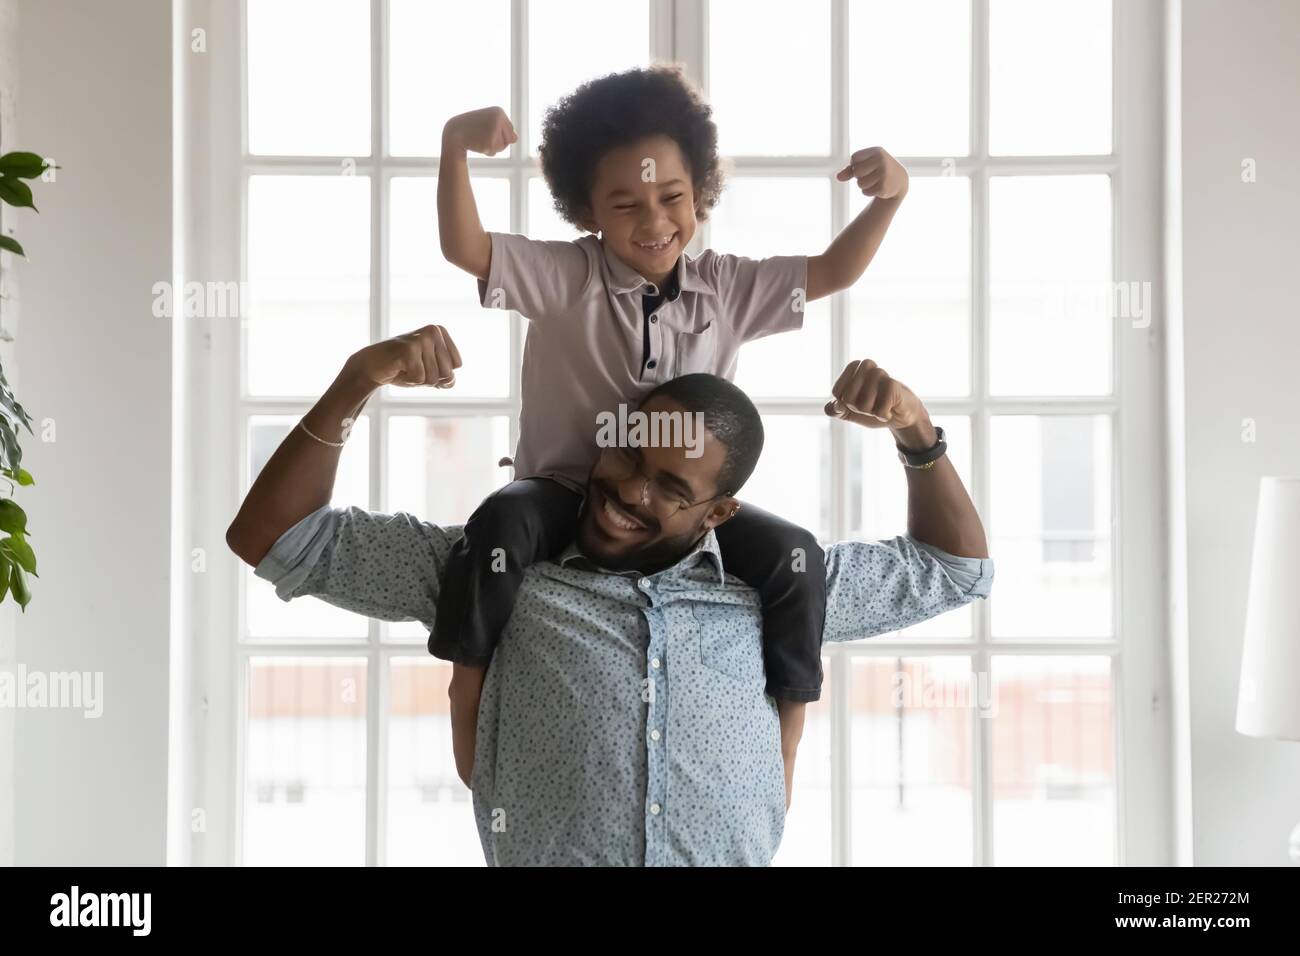 Happy funny kid riding on dads shoulders Stock Photo